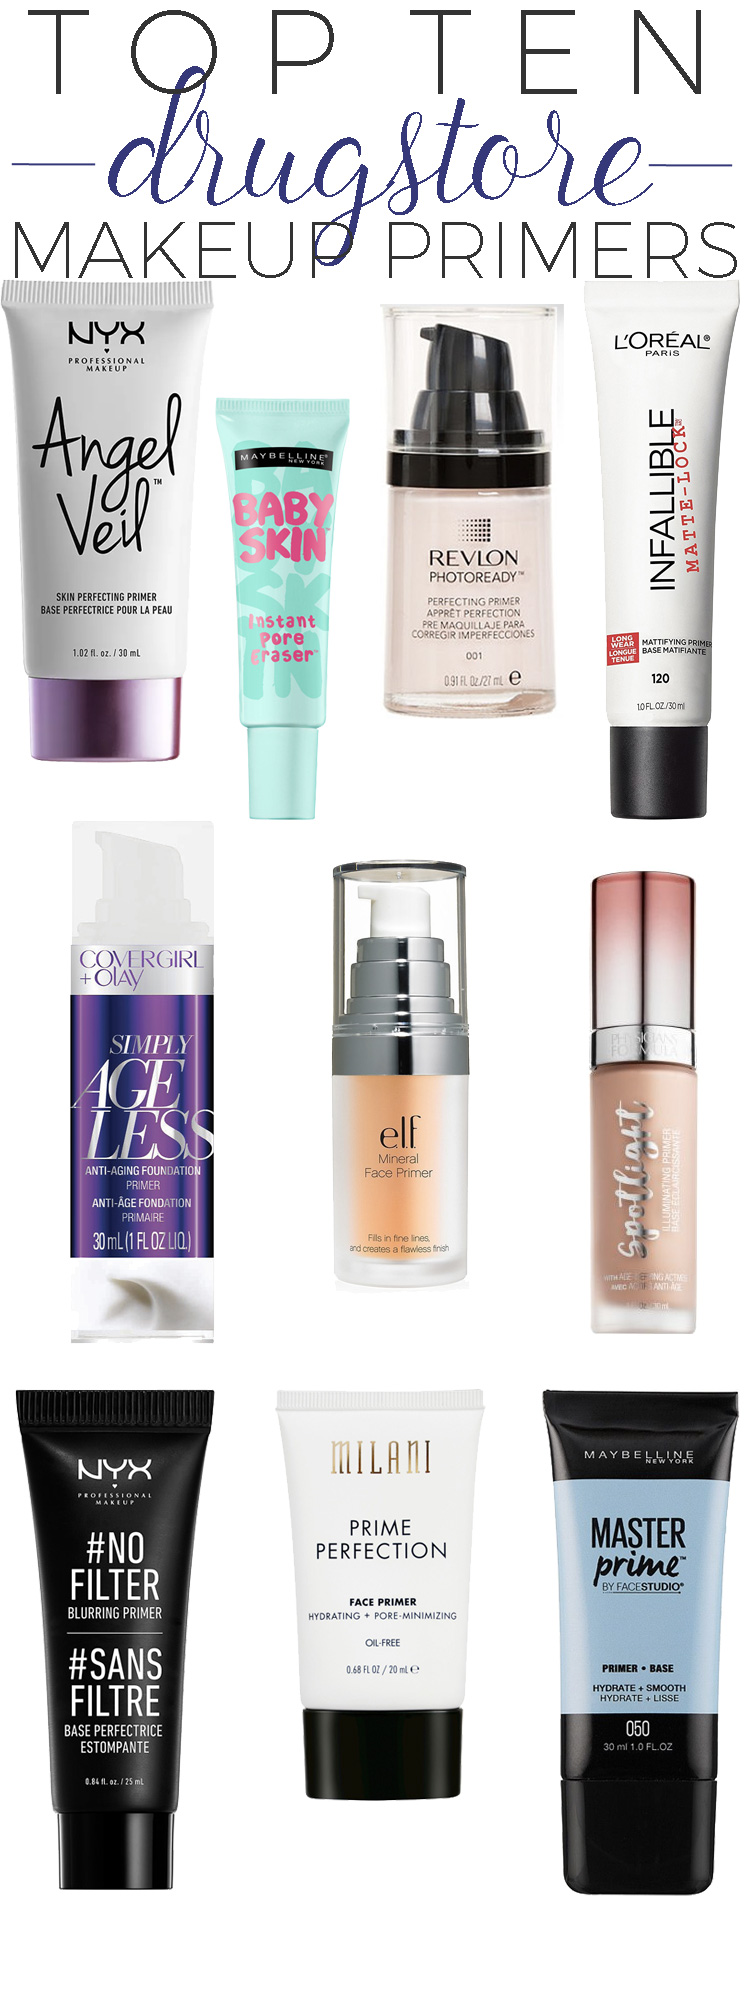 Top 10 Drugstore Makeup Primers. — Search